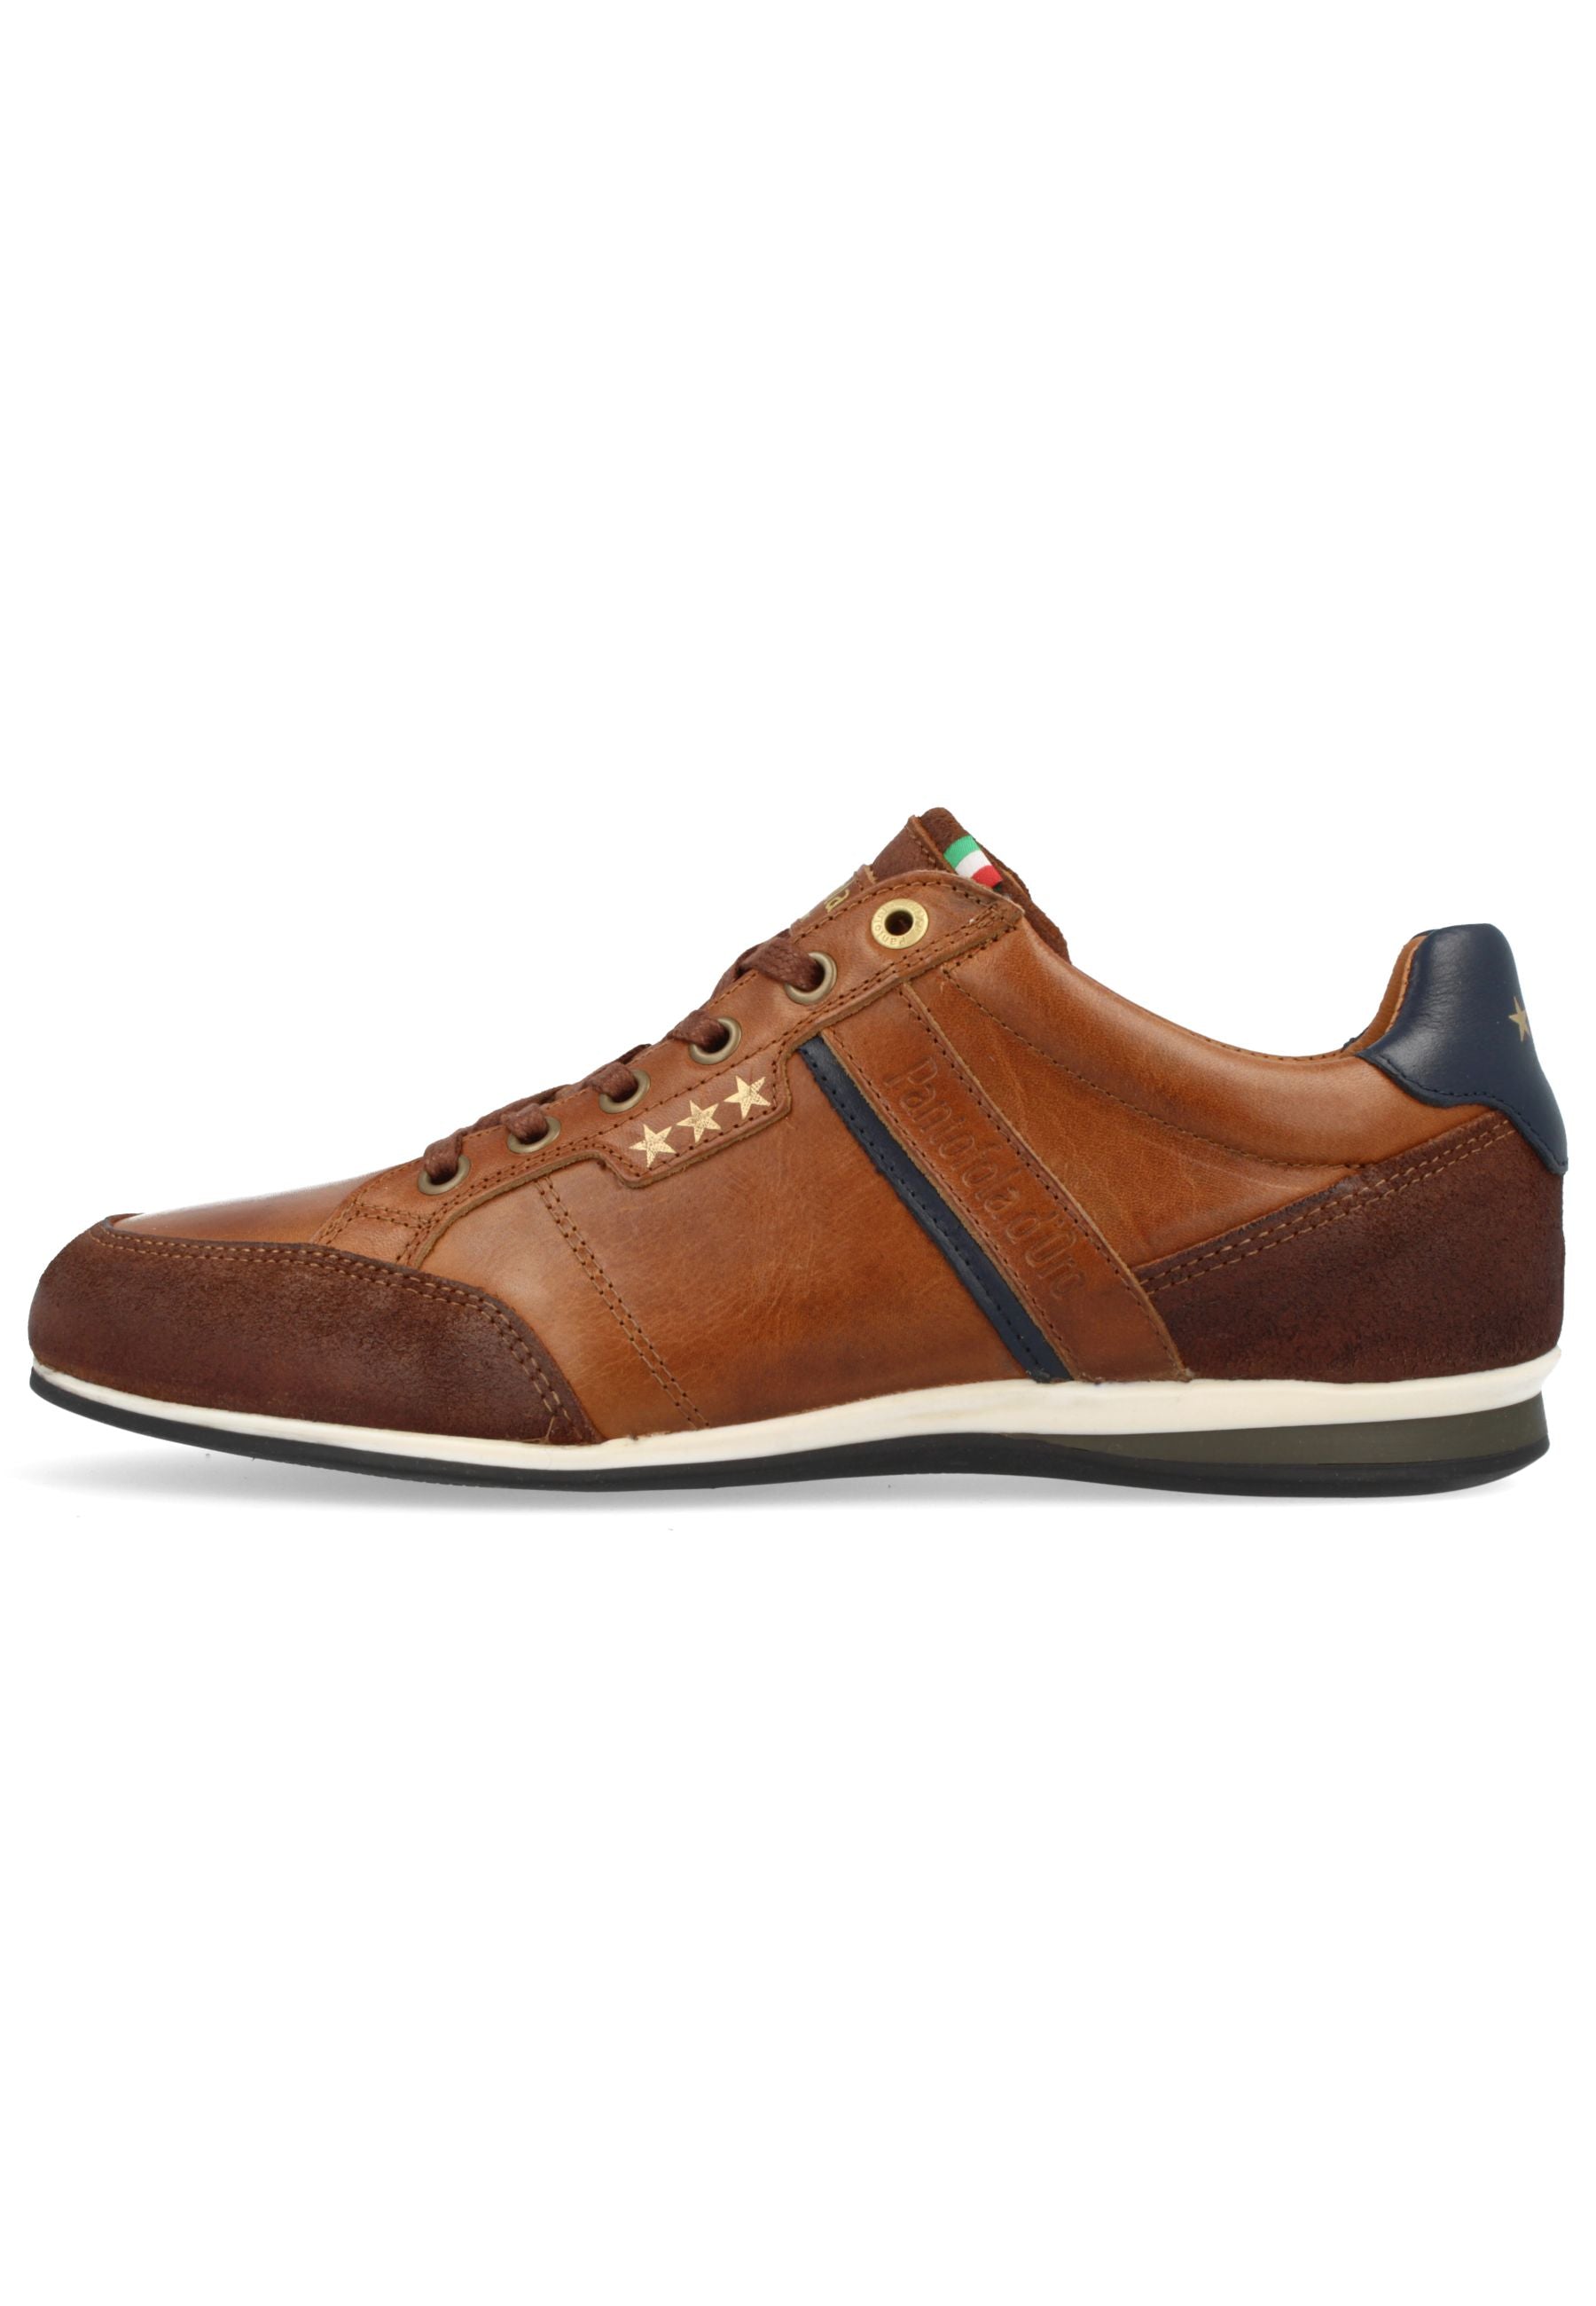 Roma Low in Tortoise Shell Sneakers Pantofola d'Oro   